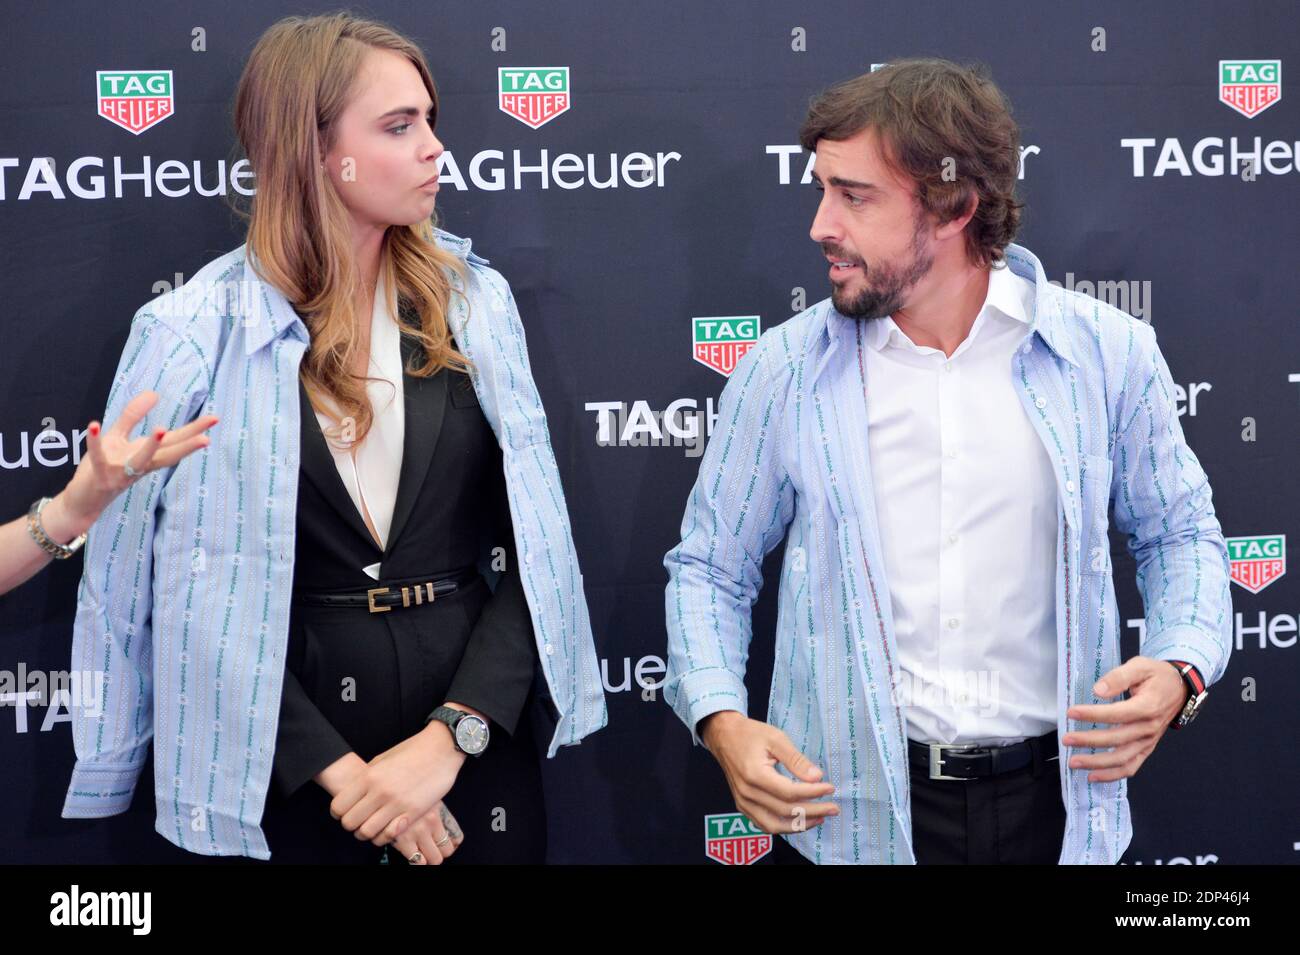 Cara Delevingne and Fernando Alonso attend a Tag Heuer party during the  2015 Formula One Grand Prix of Monaco at the Monte Carlo circuit in Monaco,  on May 23, 2014. Photo by